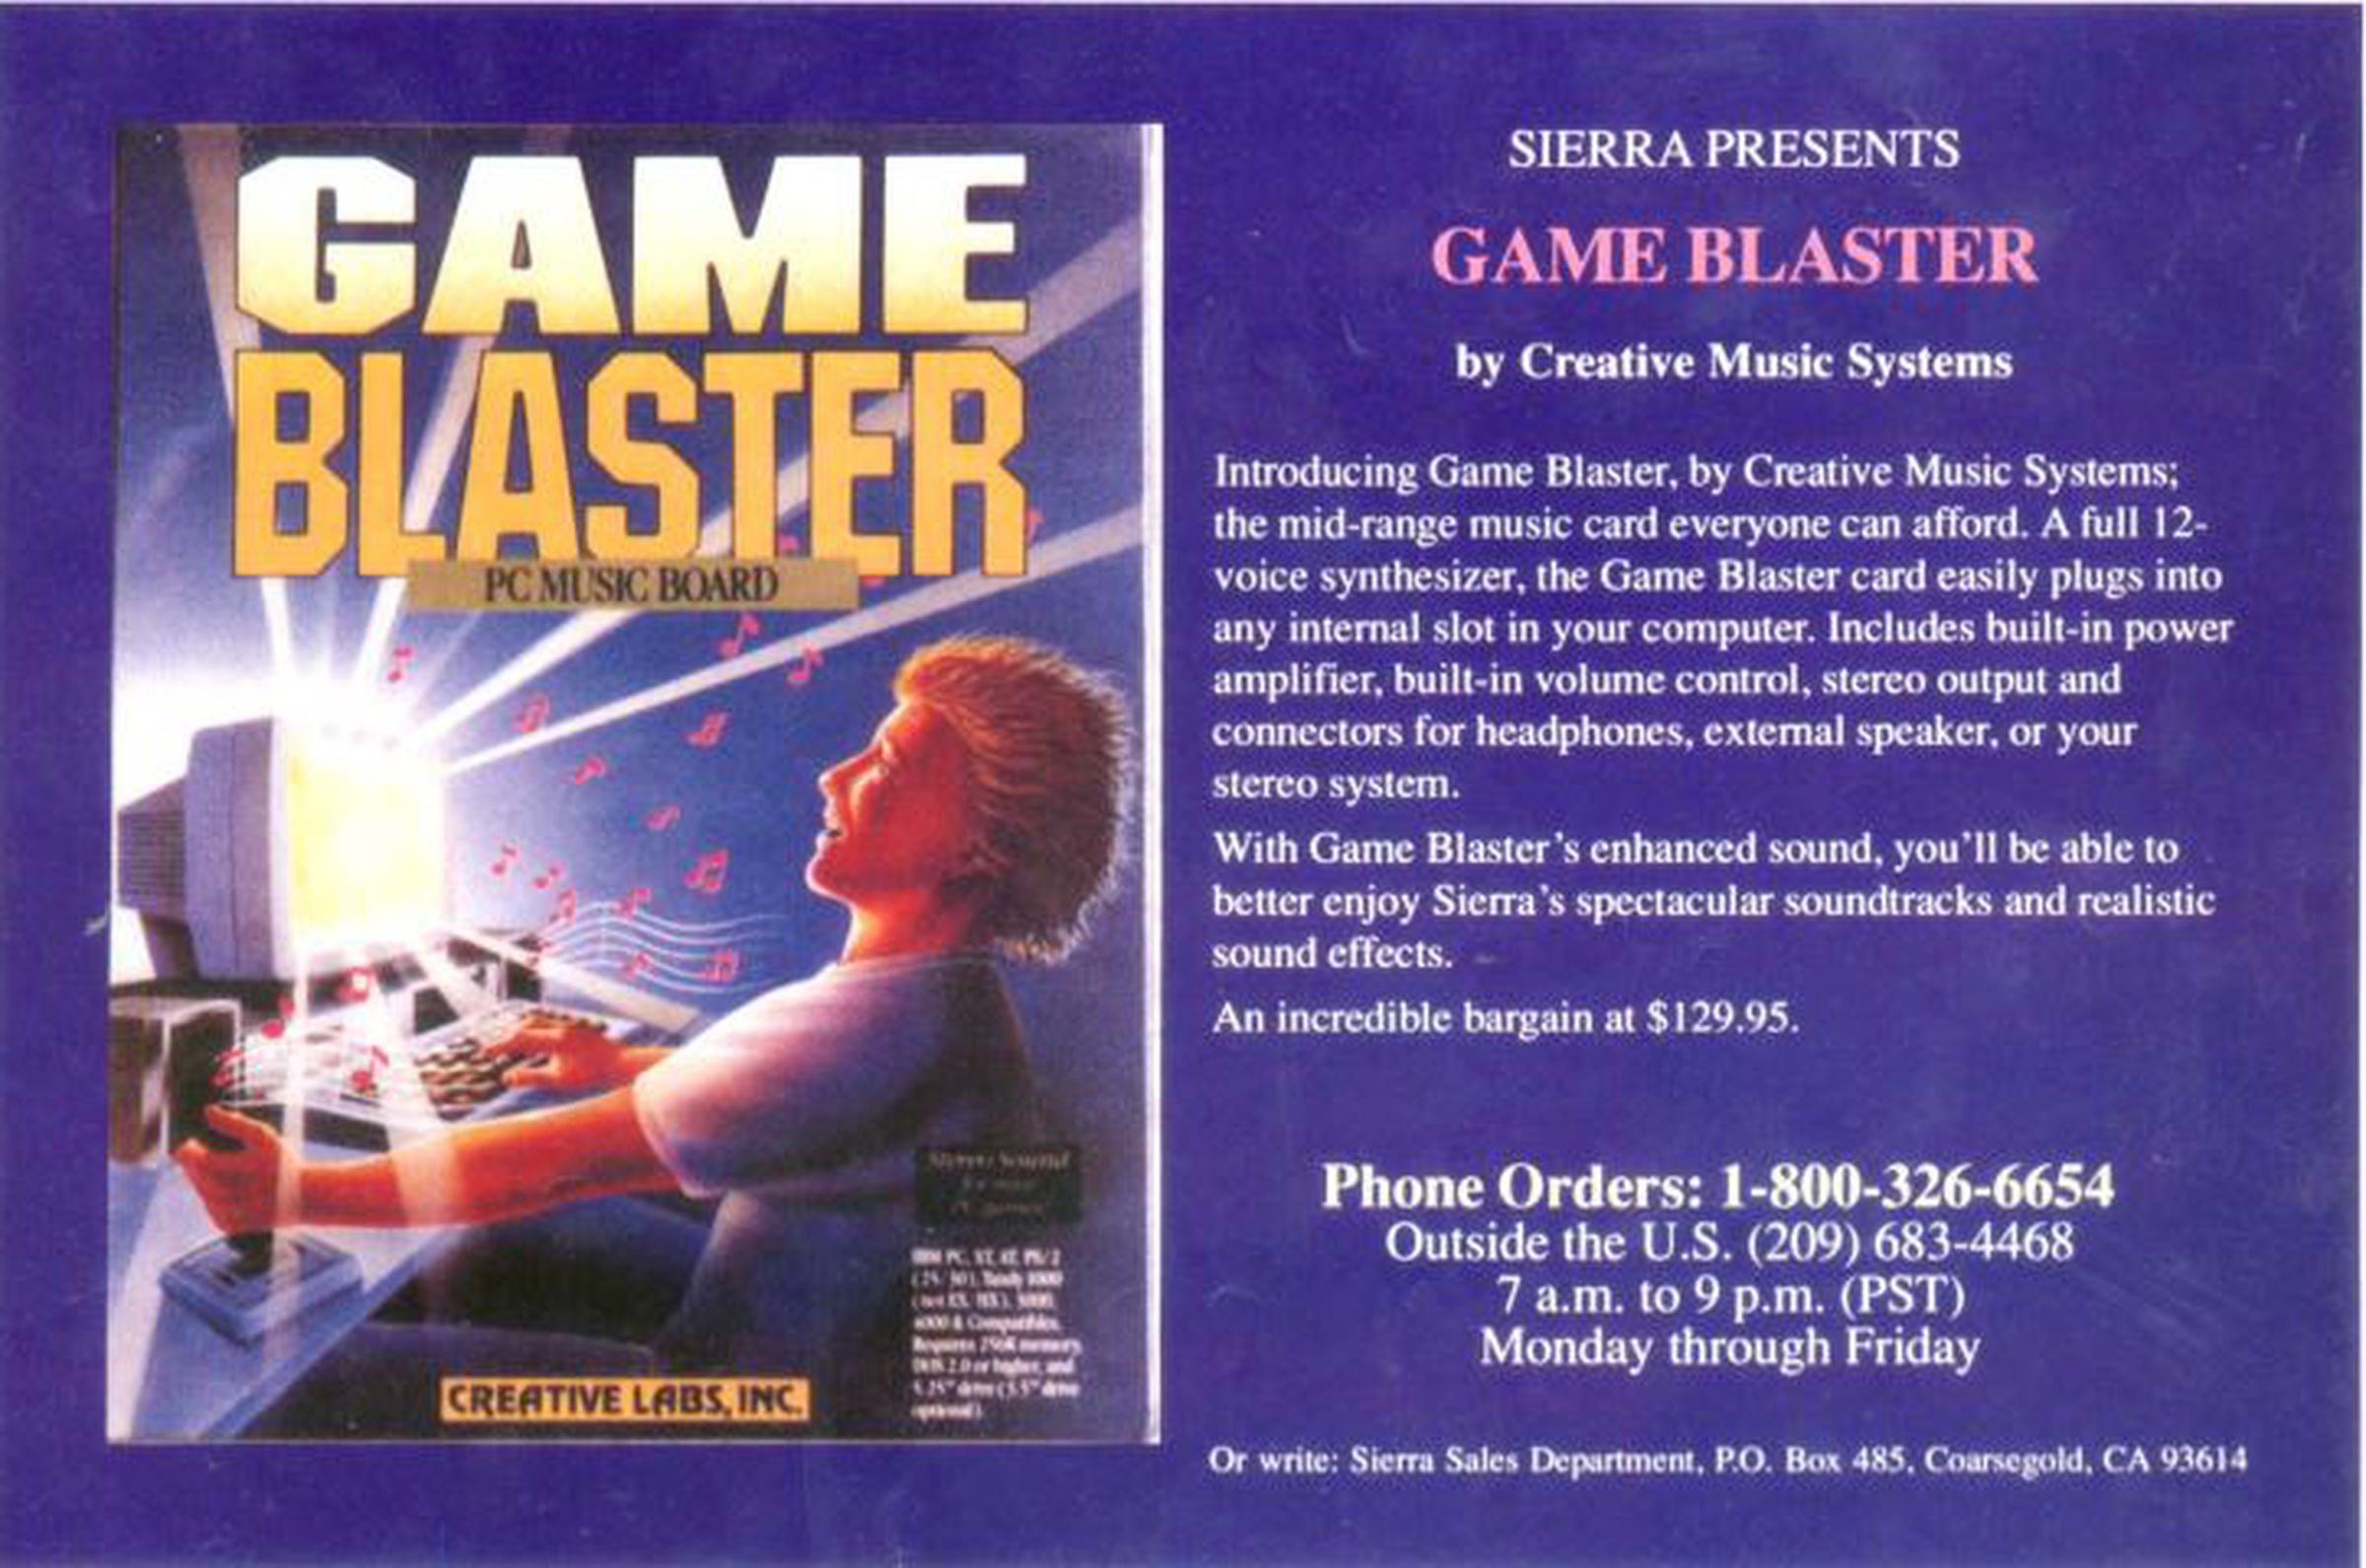 An archival image of a Game Blaster PC music board advertisement.  In part it reads: Sierra presents Game Blaster from Creative Music Systems.  A mid-range sound card that everyone can afford.  The Game Blaster is a full 12-voice synthesizer that plugs easily into any internal port on your computer.  It includes a built-in power amplifier, built-in volume control, stereo output, and connectors for headphones, an external speaker, or a stereo system. 